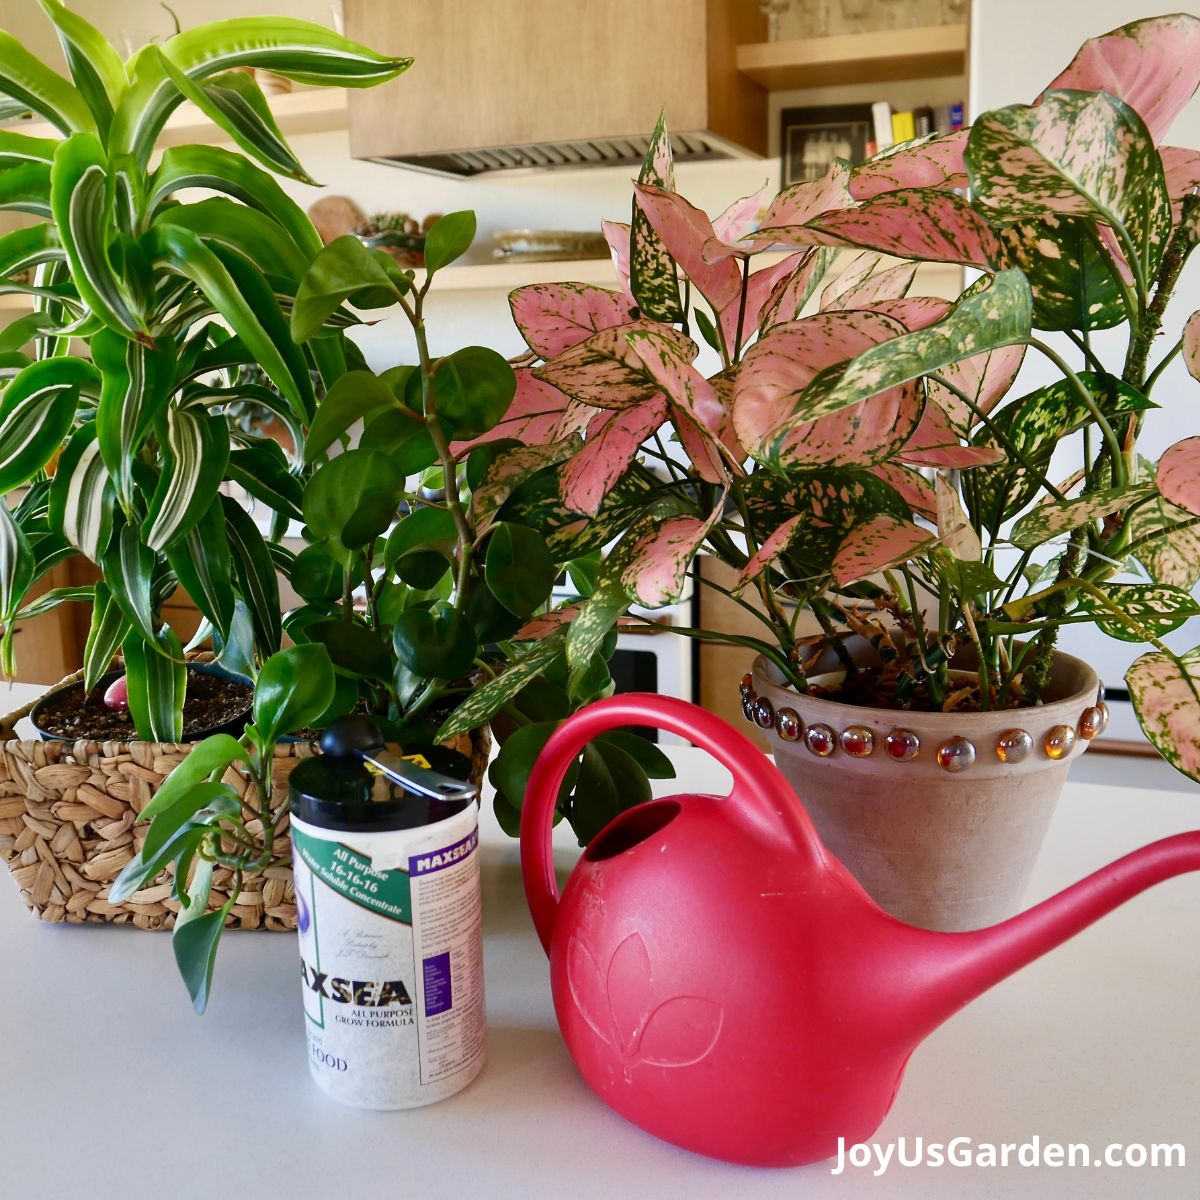 dracaena lemon twist, baby rubber plant, and pink valentine aglaonema sitting on kitchen counter with maxsea plant fertilizer and red watering can 